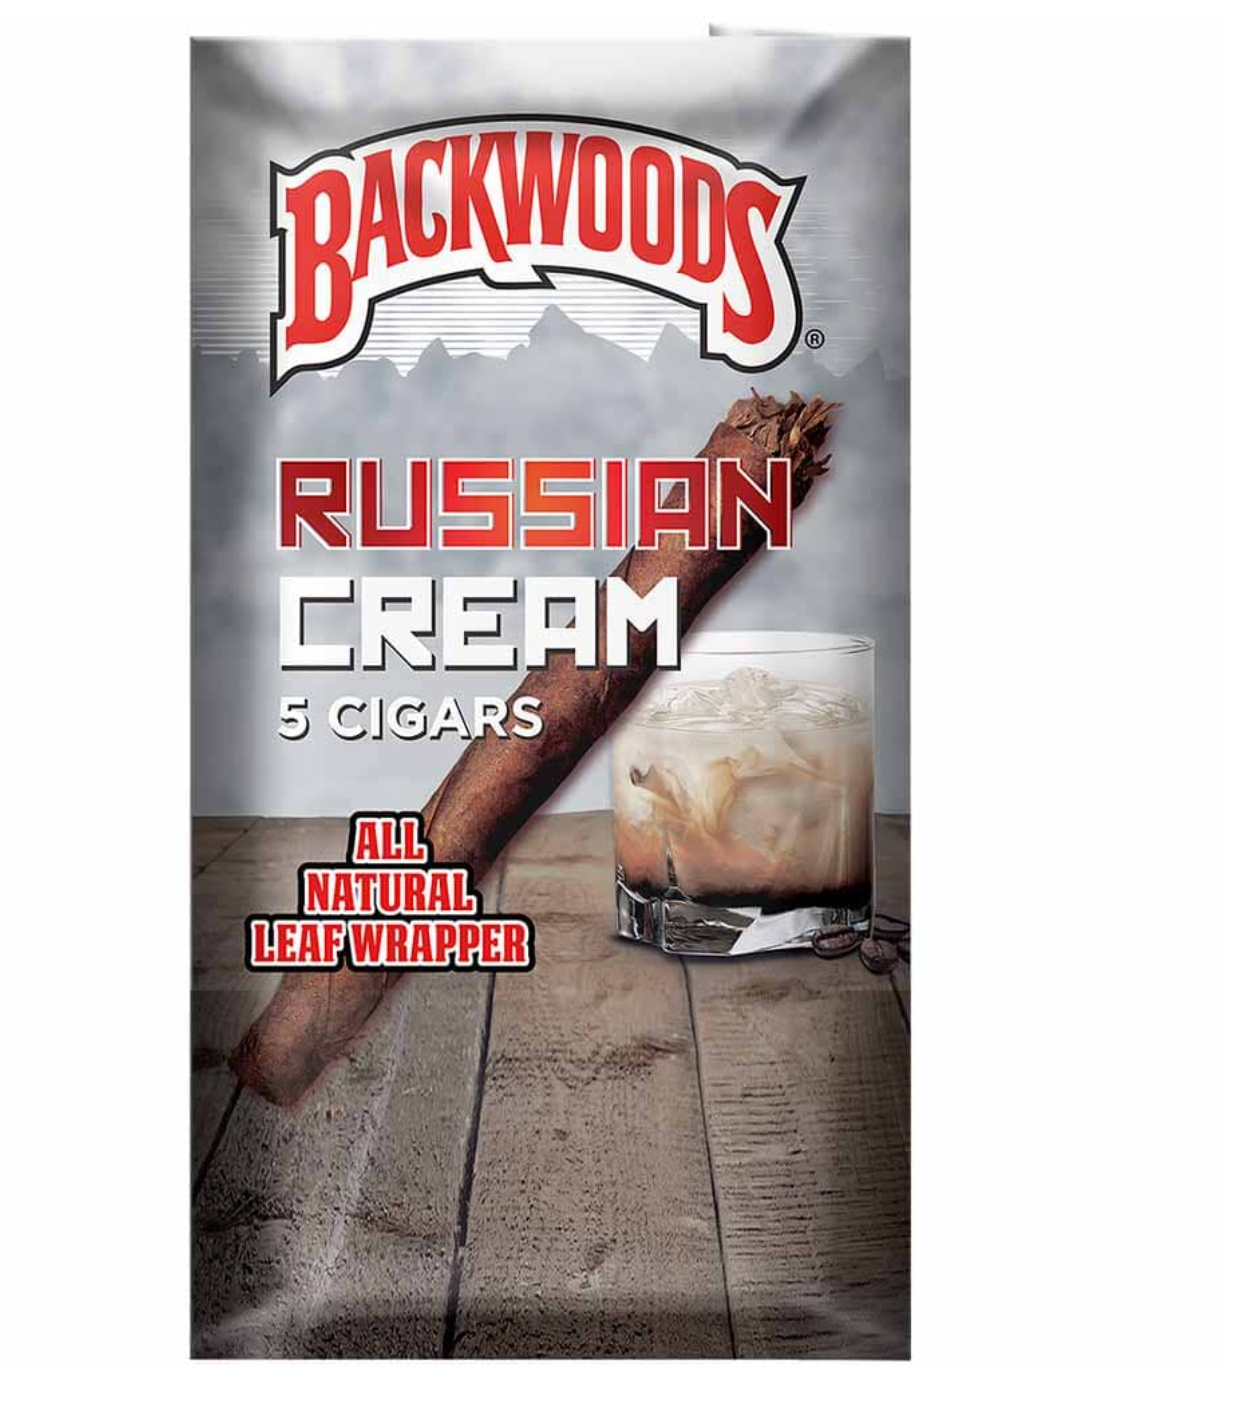 Backwood Cigar - Pack of 5 in 1 (original), Available flavors: Russian cream